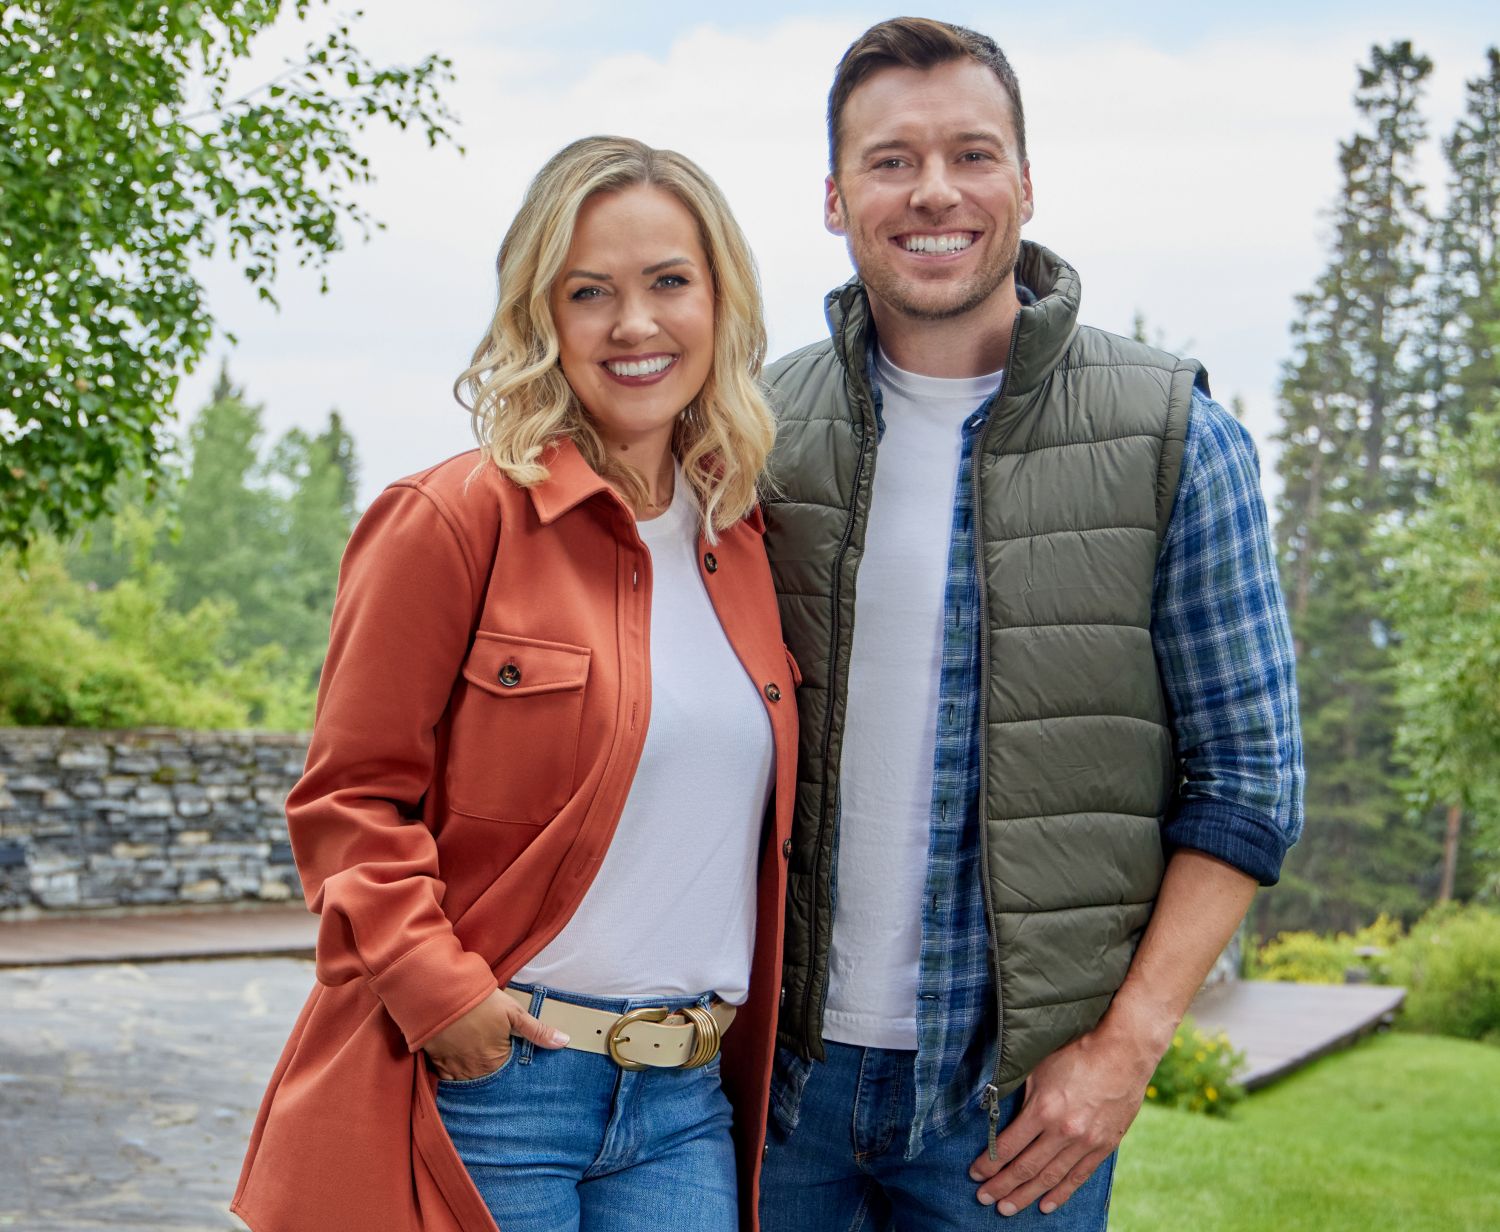 Retreat to You on Hallmark Channel